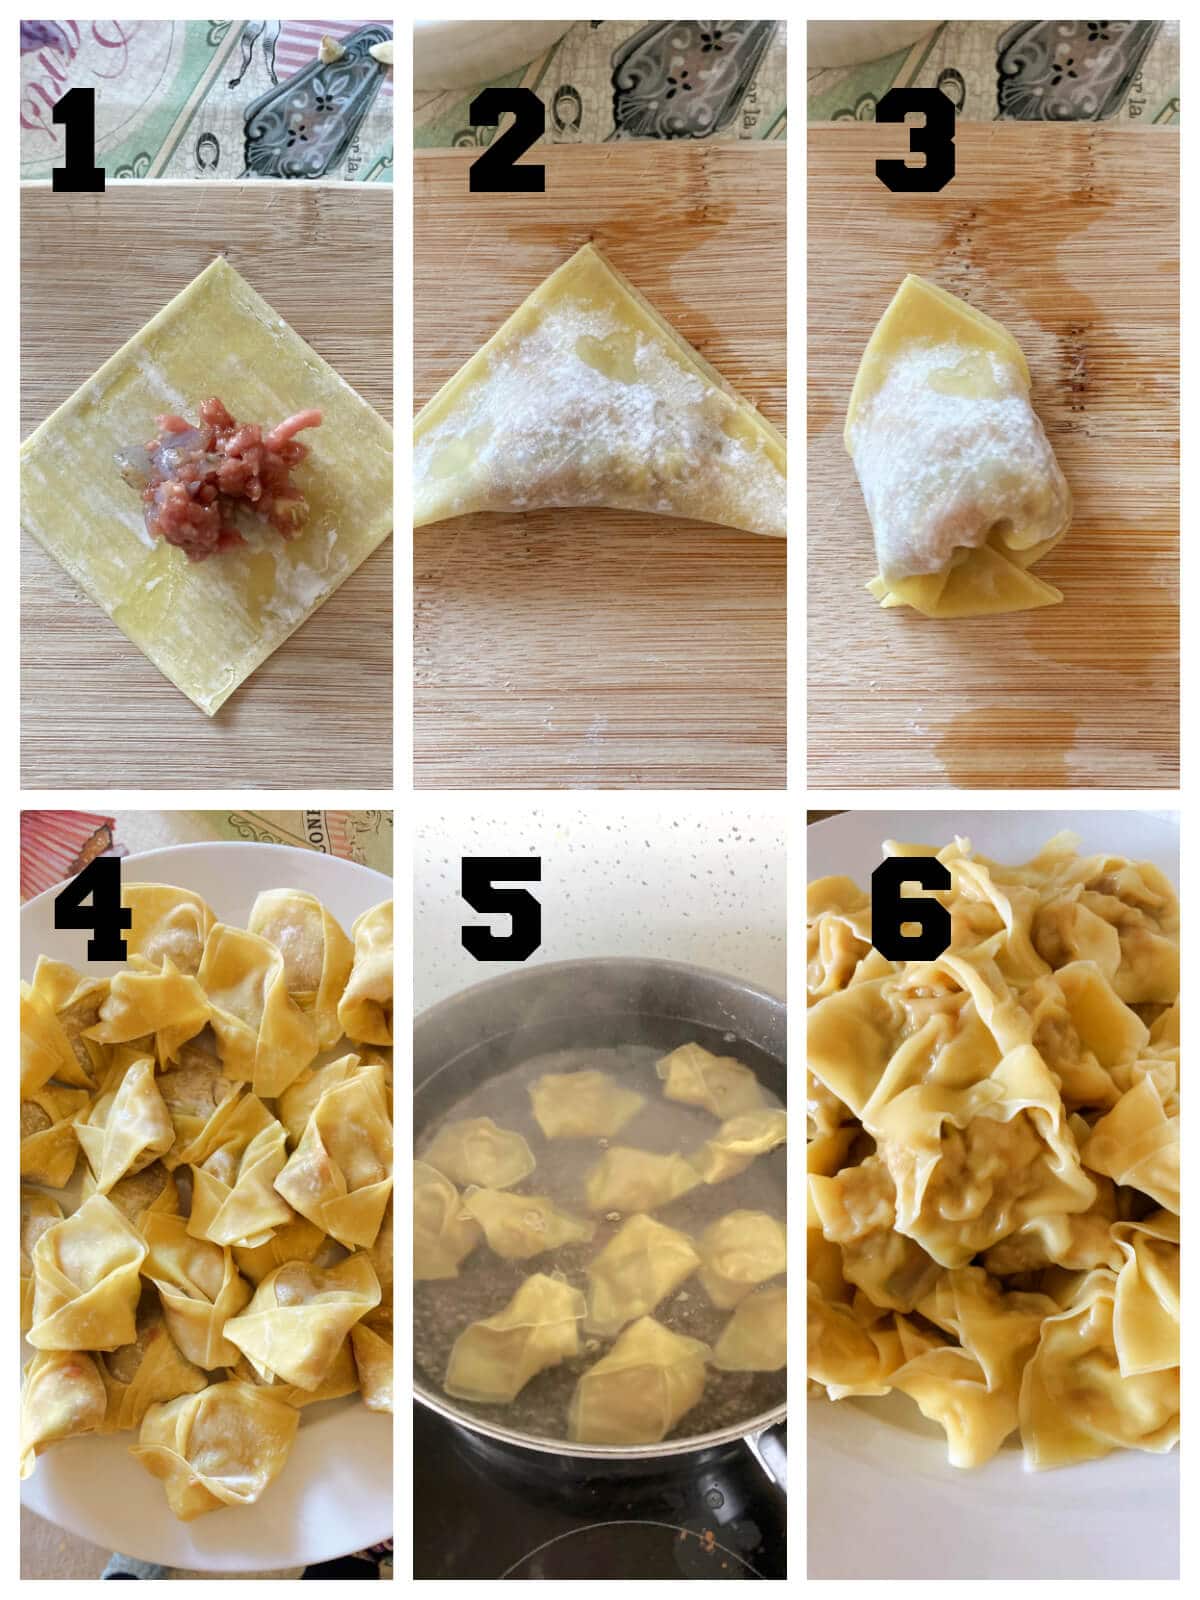 Collage of 6 photos to show how to make wontons.